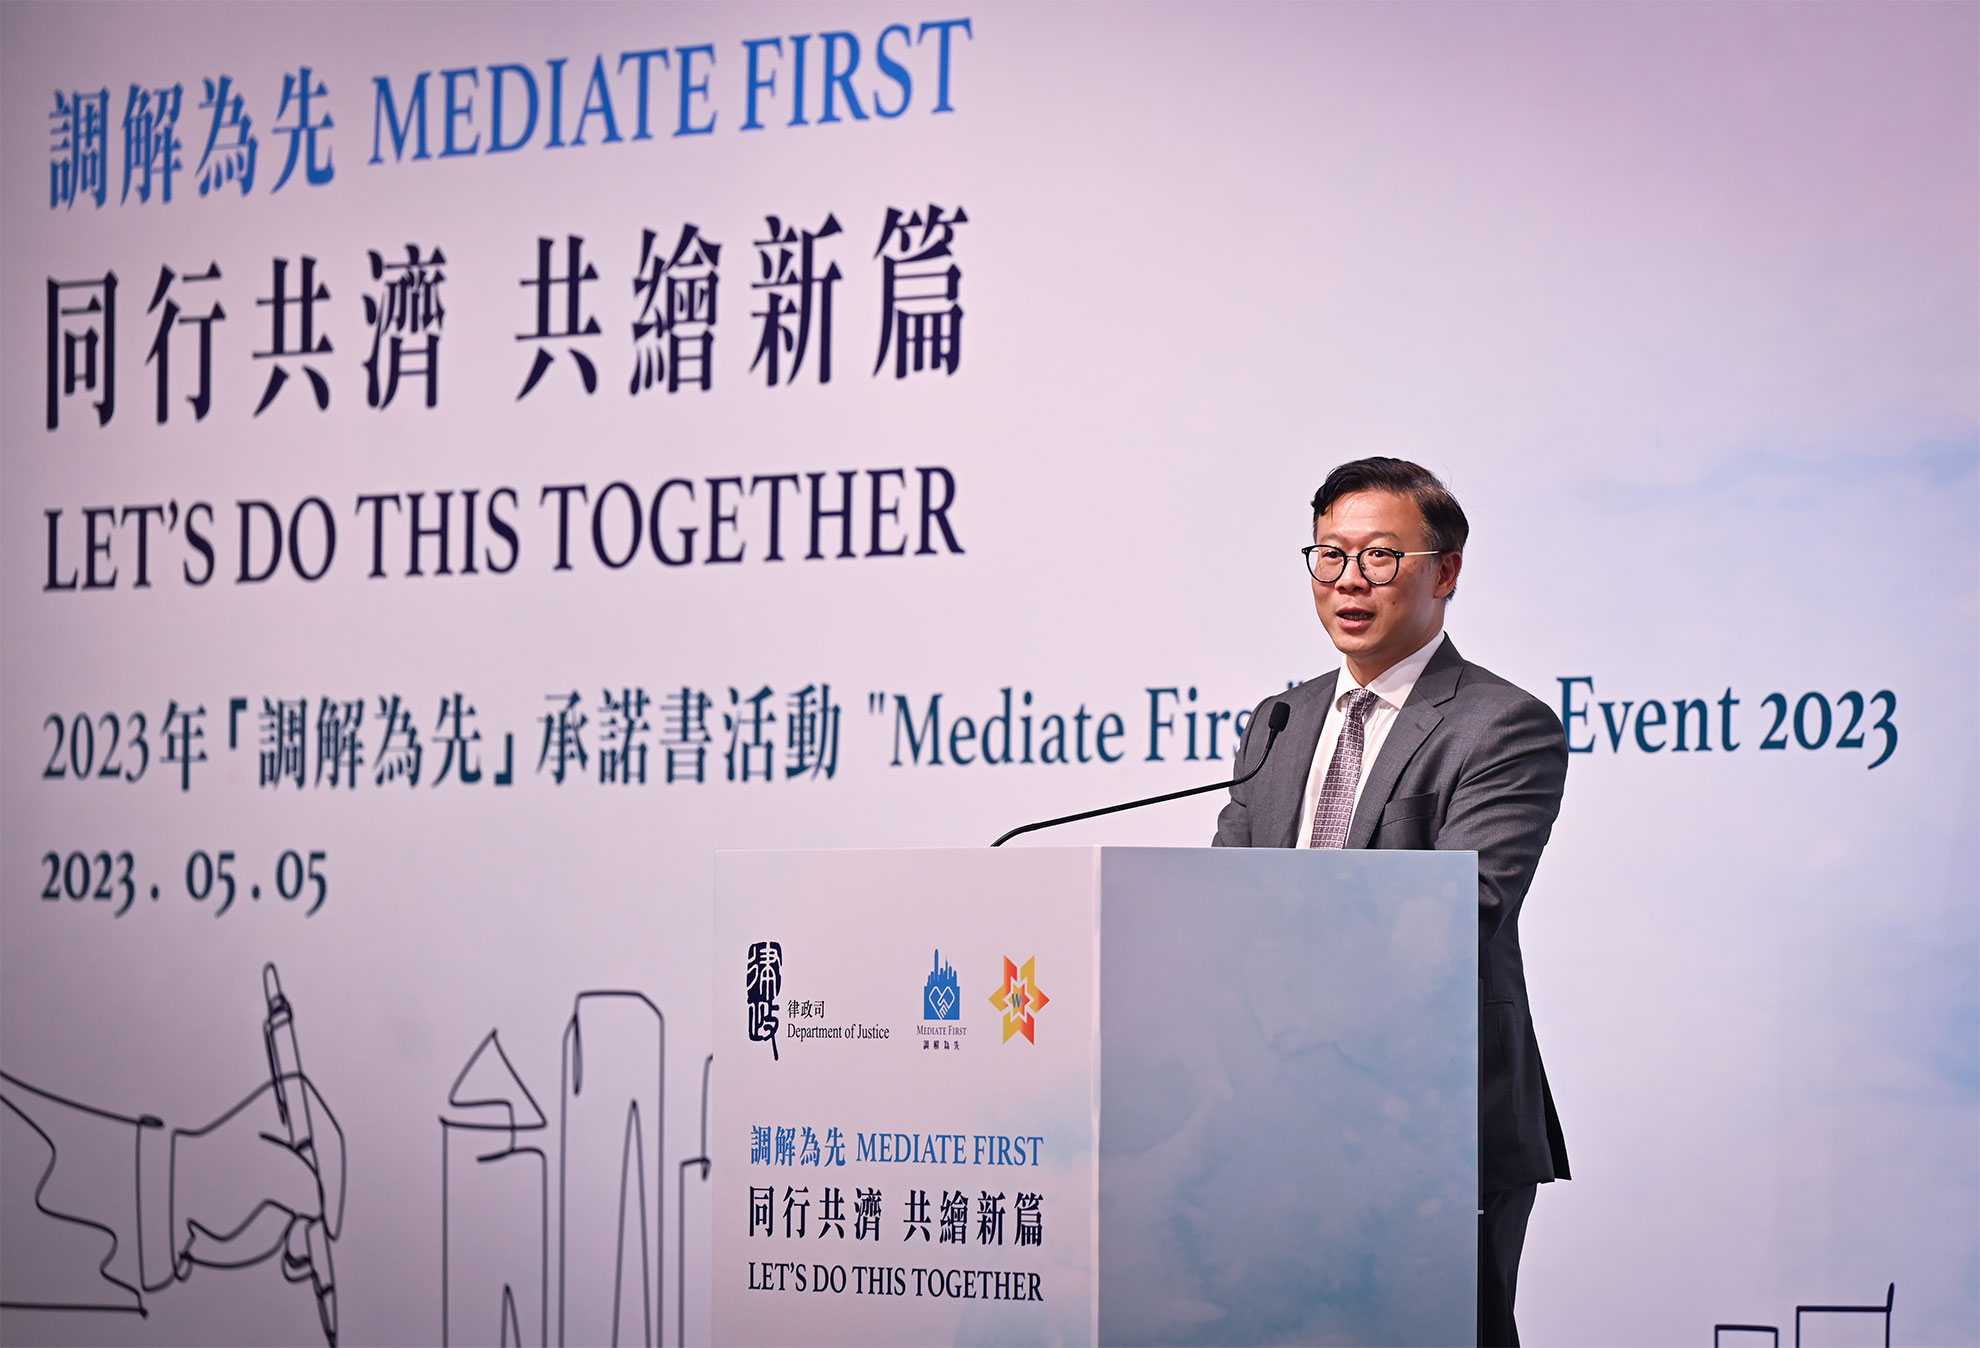 The biennial ”Mediate First” Pledge Event organised by the Department of Justice was held today (May 5). Photo shows the Deputy Secretary for Justice, Mr Cheung Kwok-kwan, delivering his closing remarks.